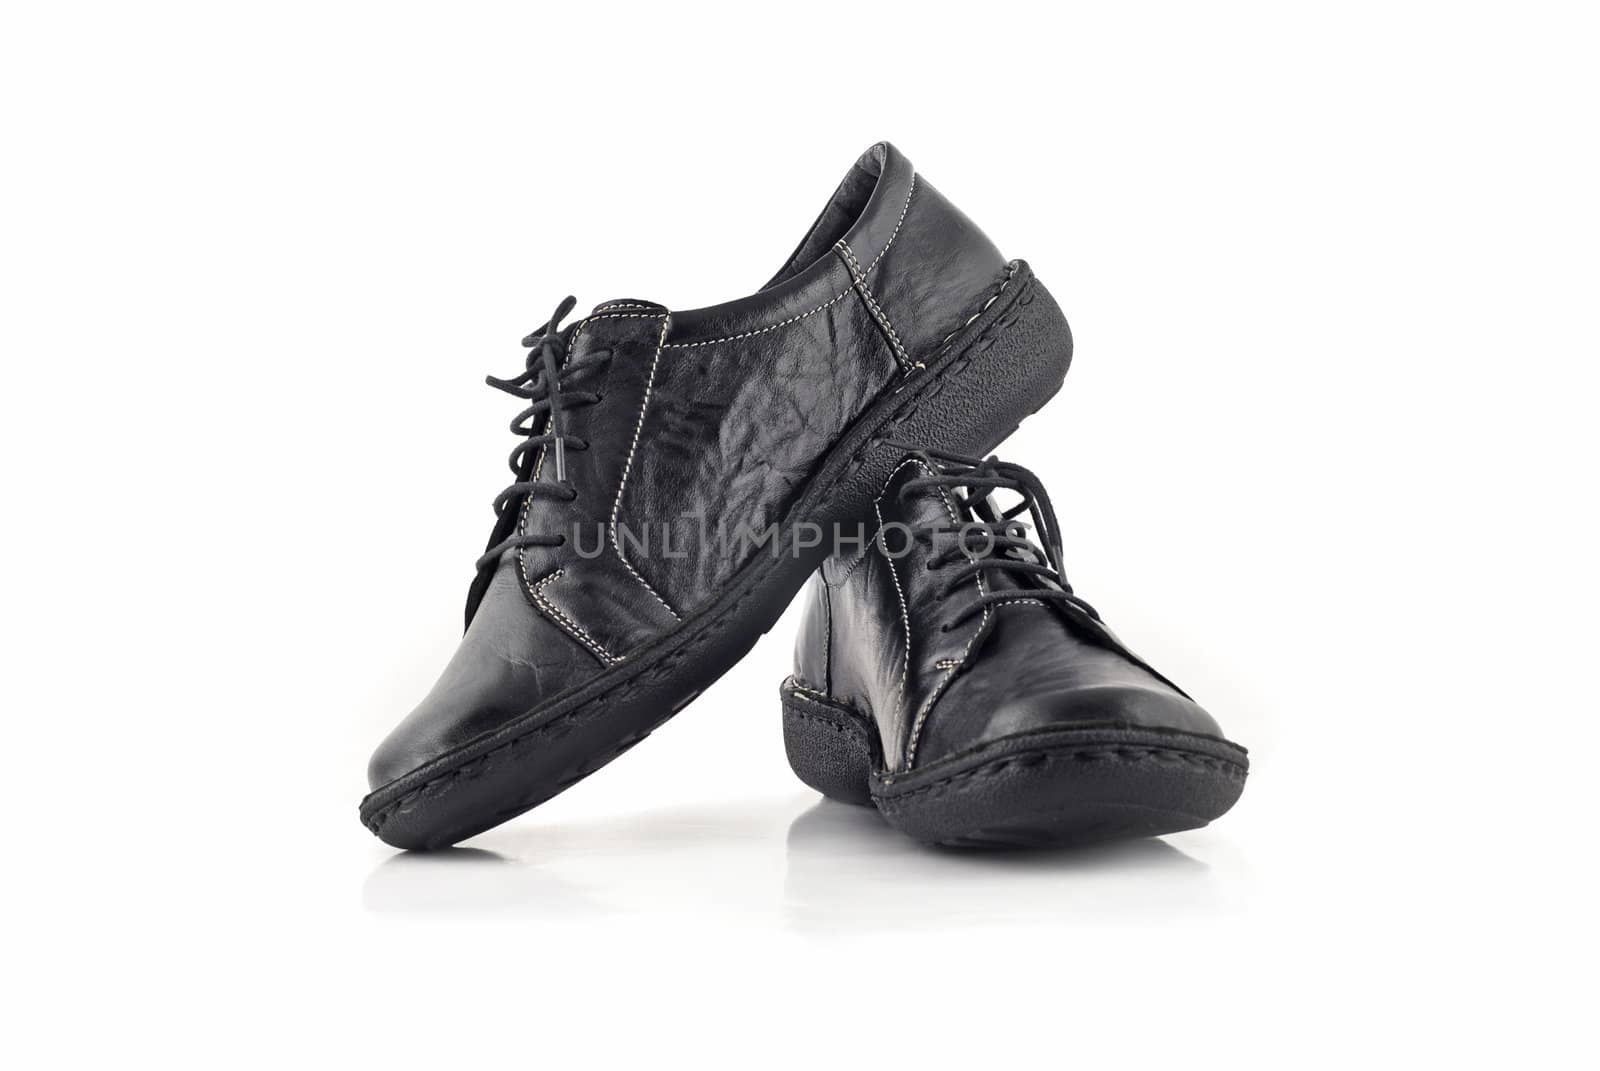 Pair of black leather women's shoes over white by Arsgera